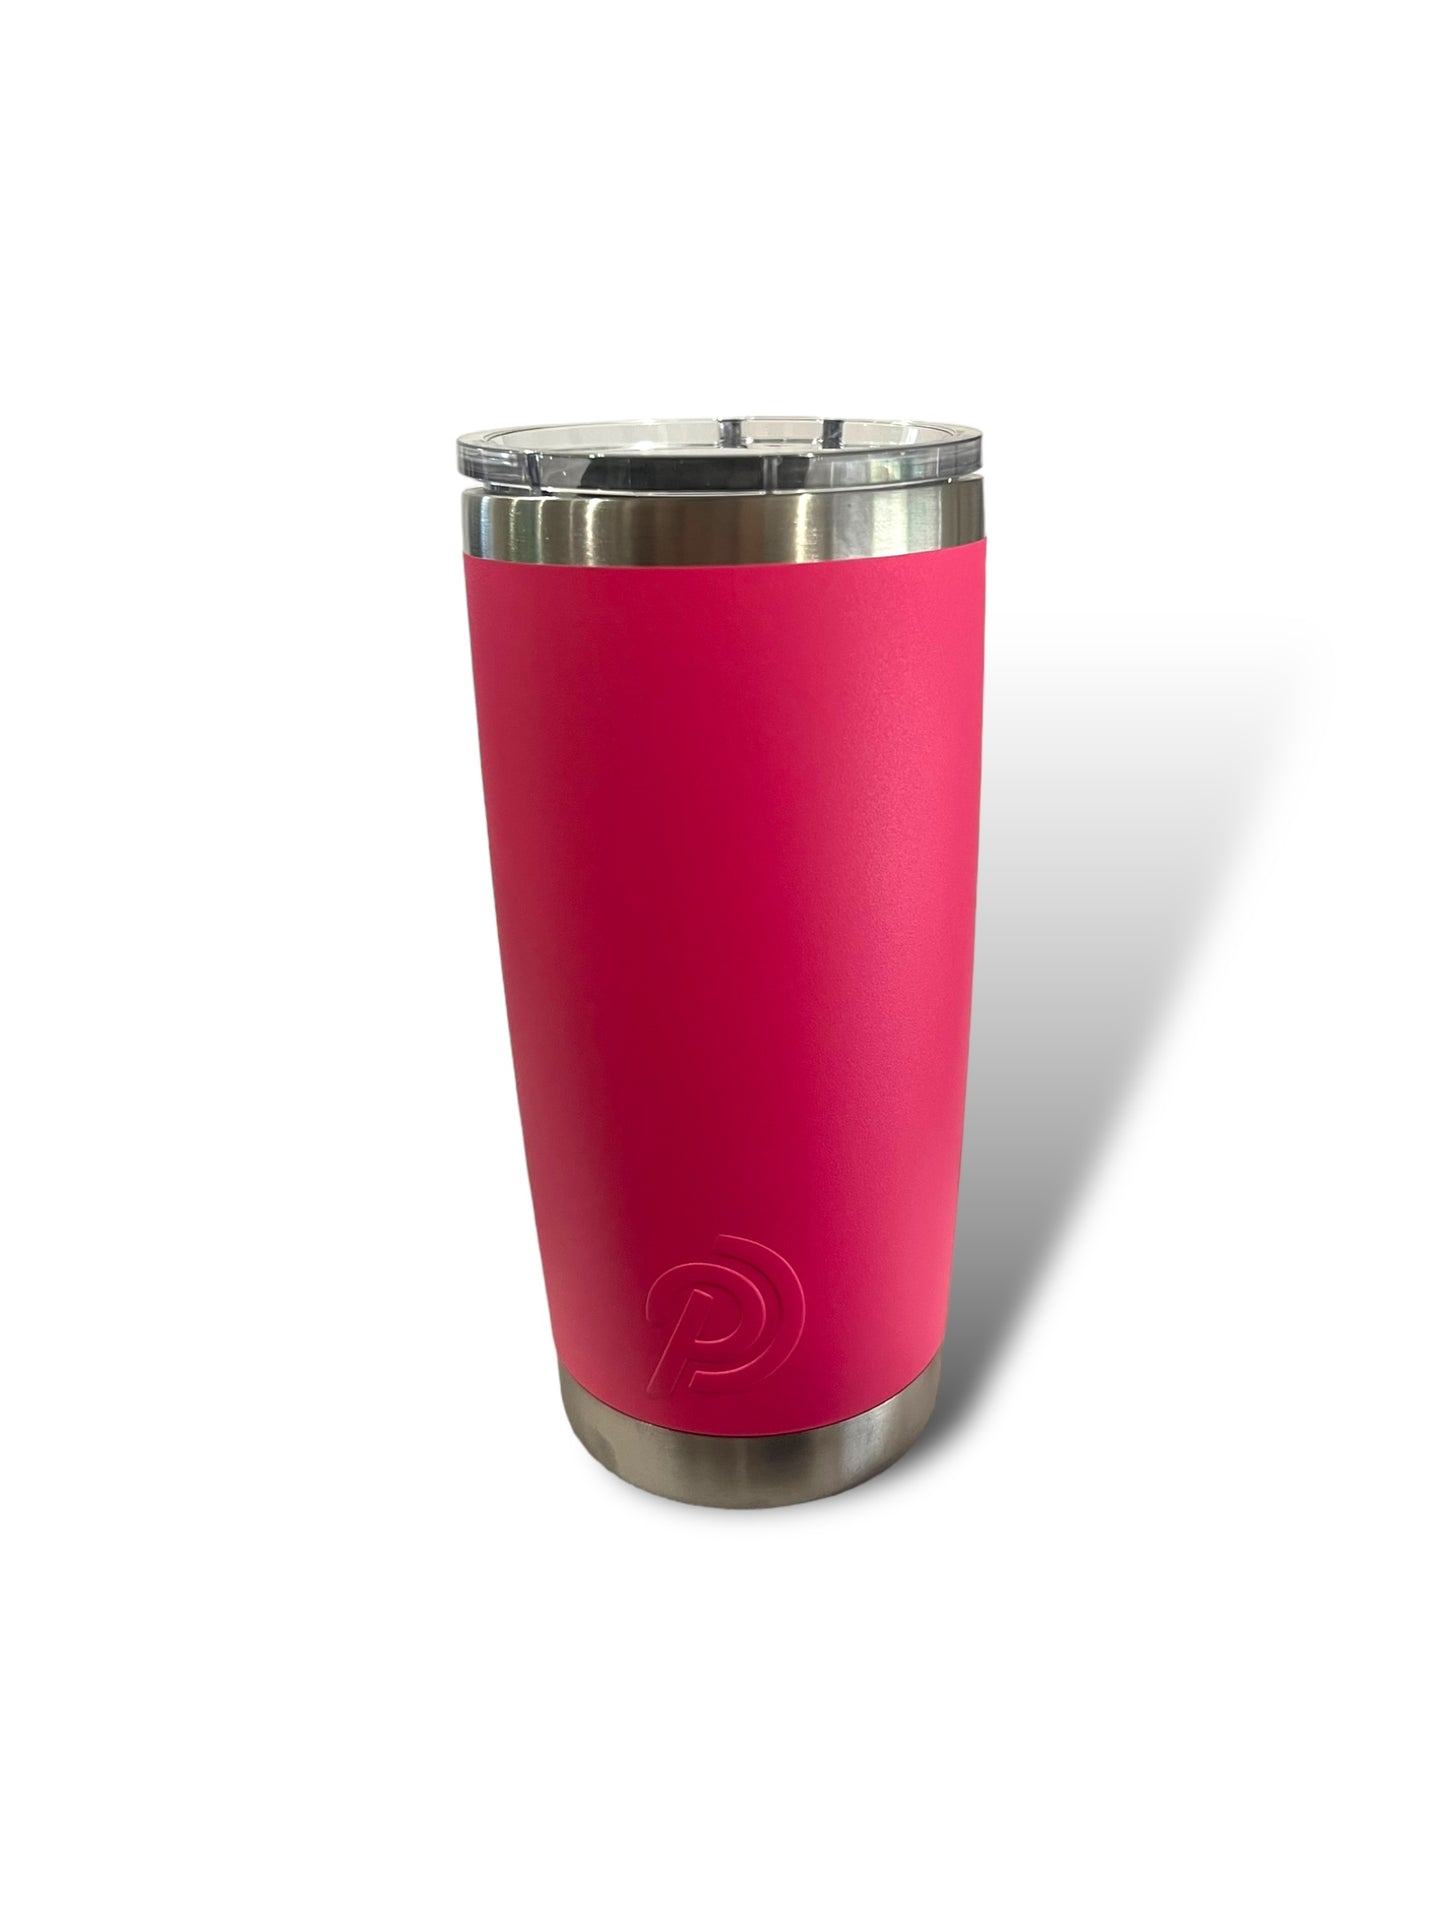 Hot Pink 20oz stainless steel insulated travel mug cup